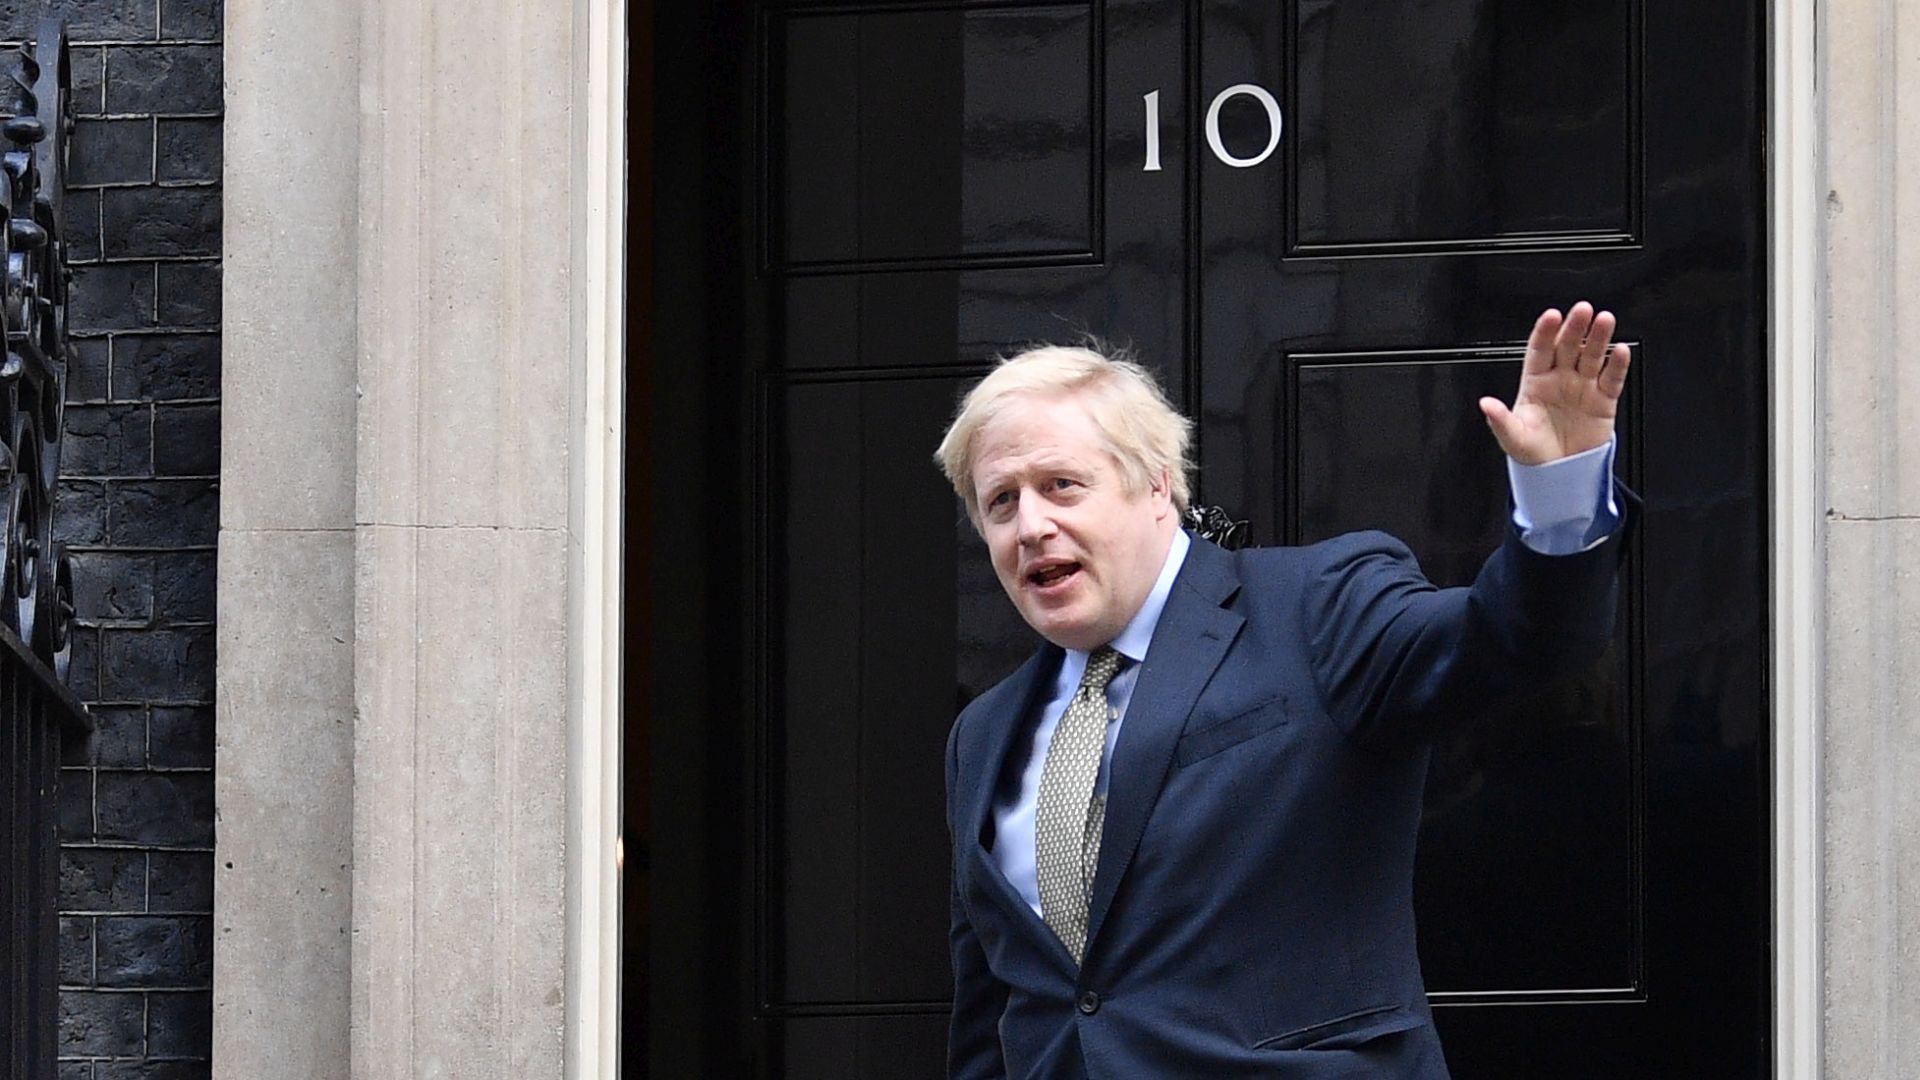 epa08068497 British Prime Minister Boris Johnson returns to 10 Downing Street after a meeting with the Queen in London, Britain, 13 December 2019. Britons went to the polls for a general election on 12 December 2019, which the Conservative Party led by Johnson has won with an overall majority.  EPA/NEIL HALL